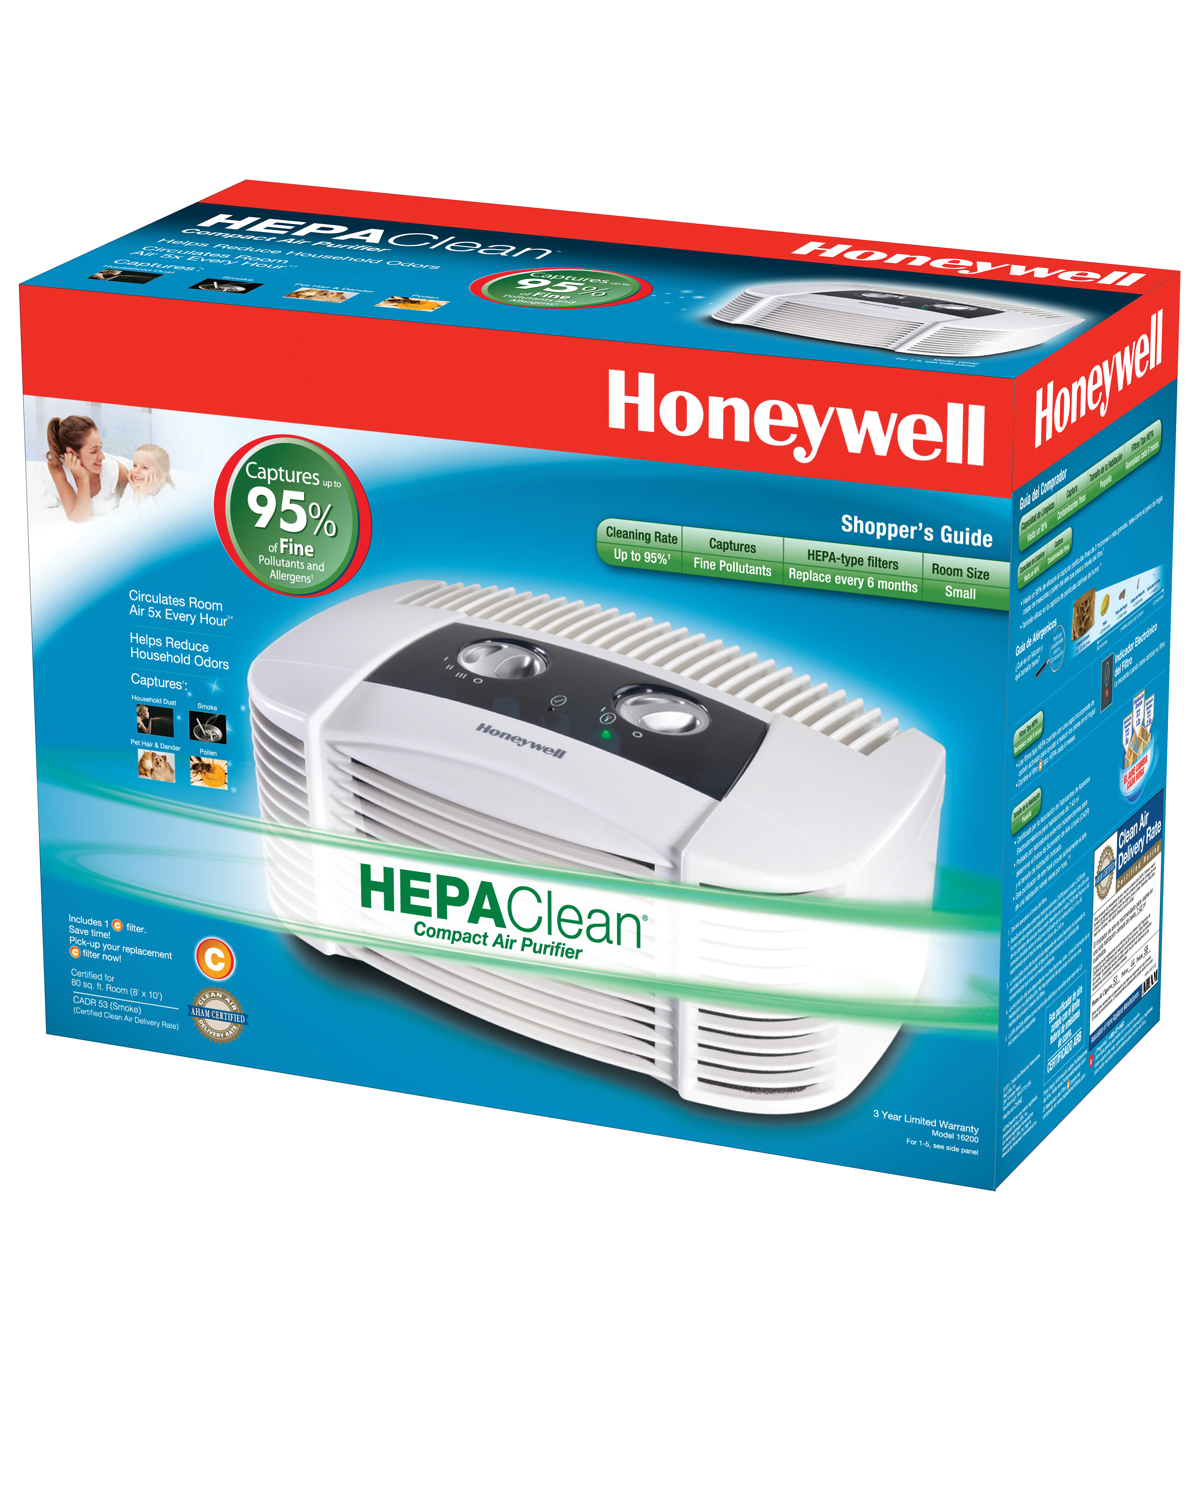 Honeywell HEPAClean Compact Air Purifier 16200, White - image 2 of 2